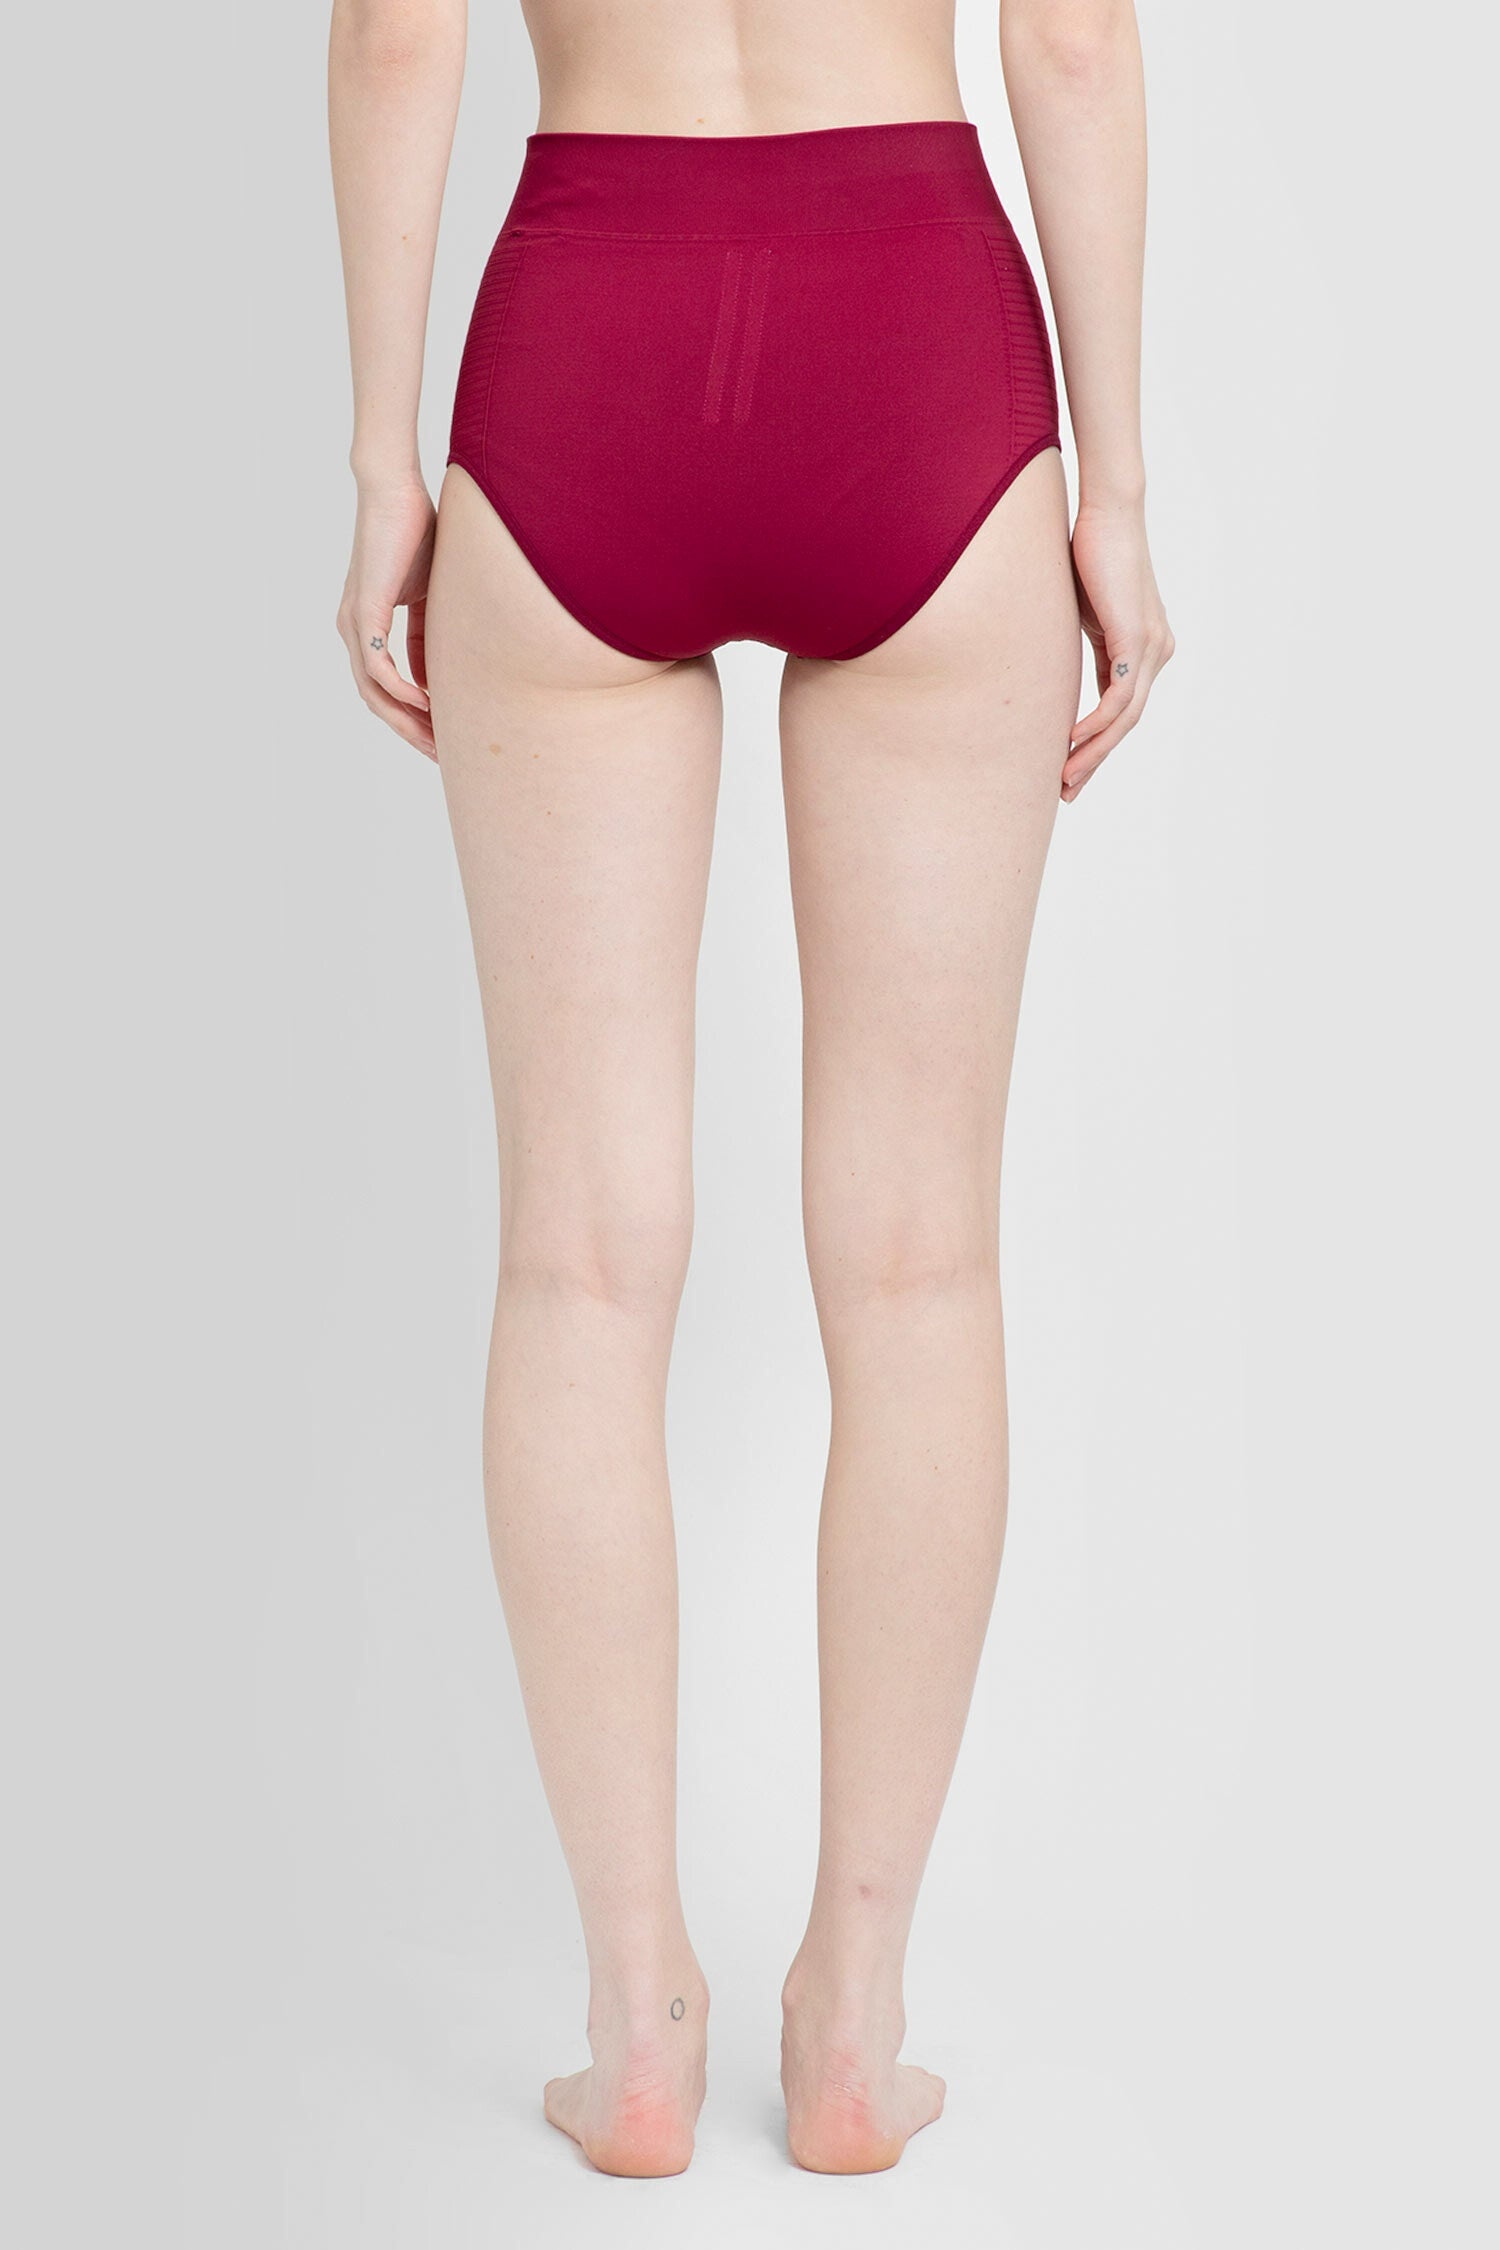 RICK OWENS WOMAN RED LINGERIE - 4